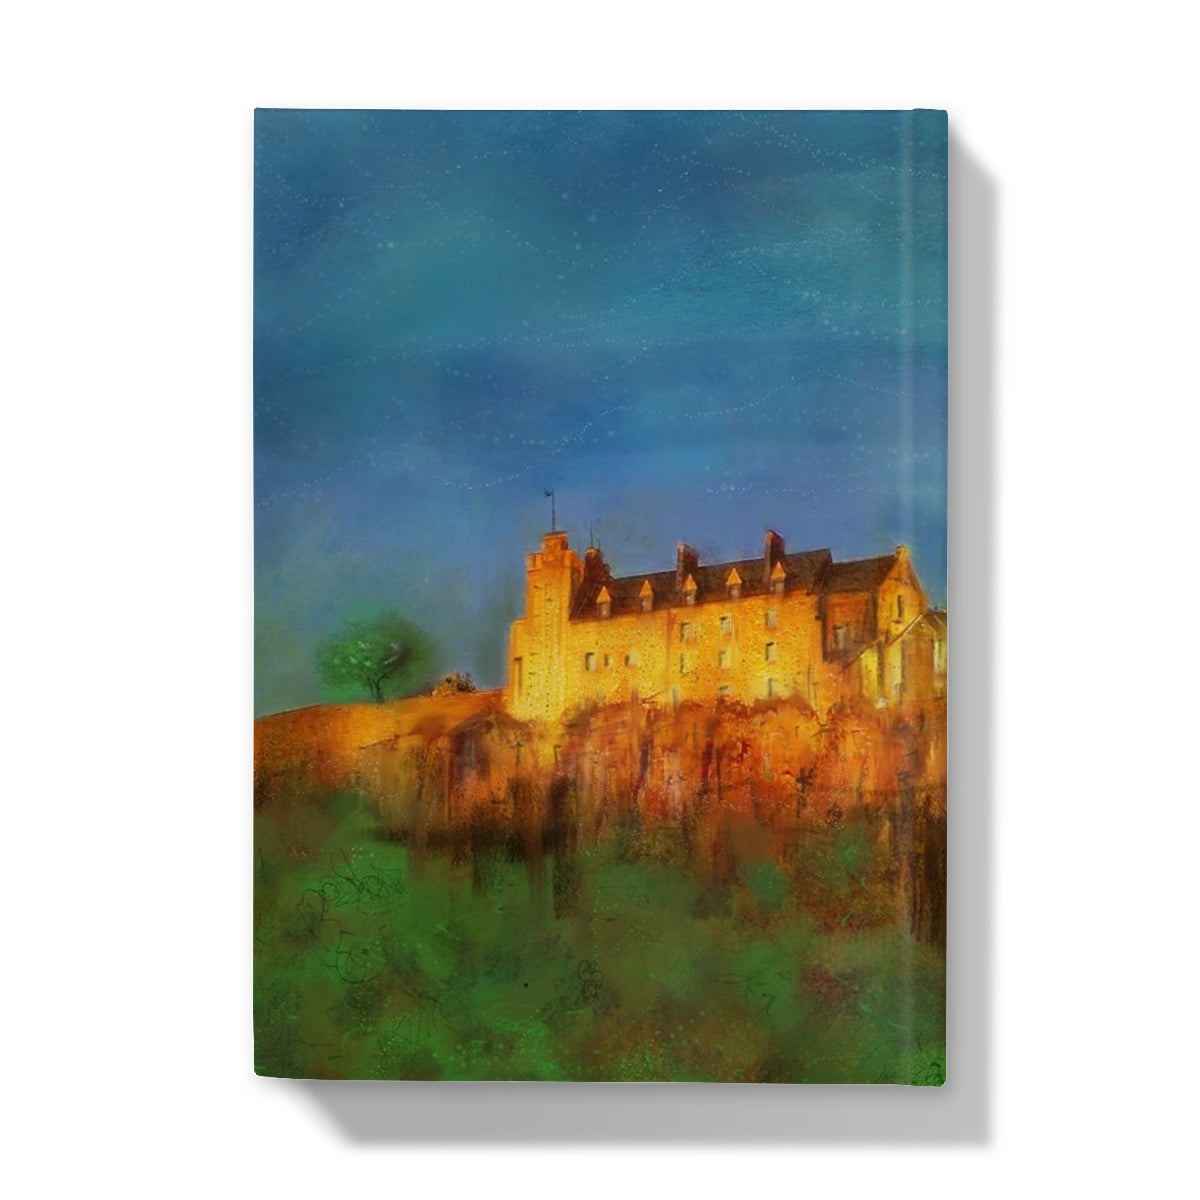 Stirling Castle Art Gifts Hardback Journal-Journals & Notebooks-Historic & Iconic Scotland Art Gallery-Paintings, Prints, Homeware, Art Gifts From Scotland By Scottish Artist Kevin Hunter